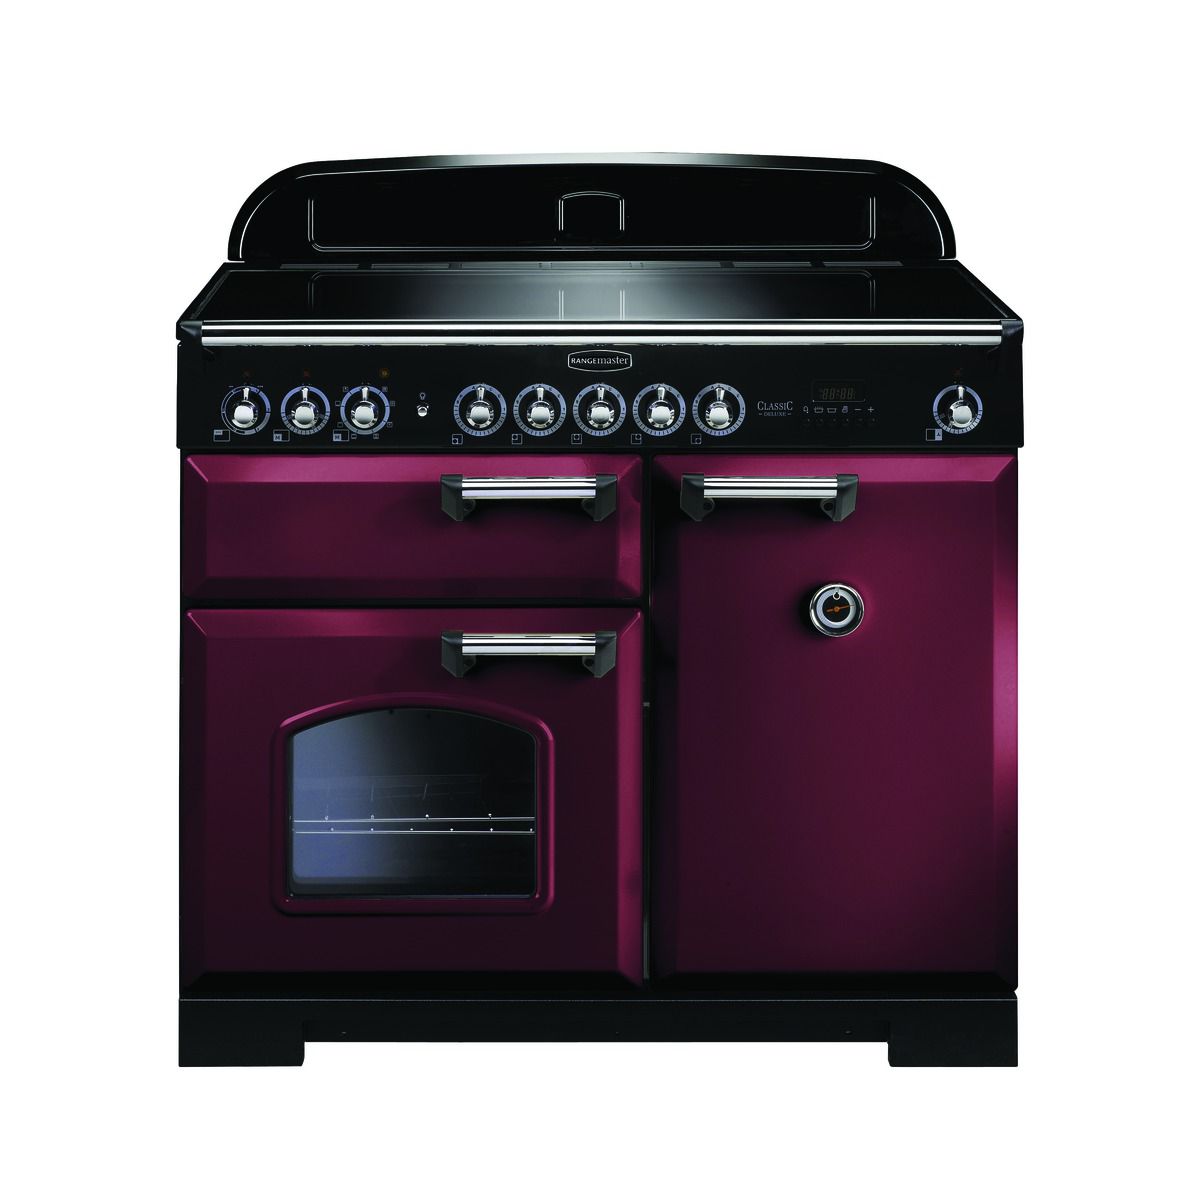 Rangemaster Classic Deluxe 100cm Induction Range Cooker - Cranberry with Chrome Trim